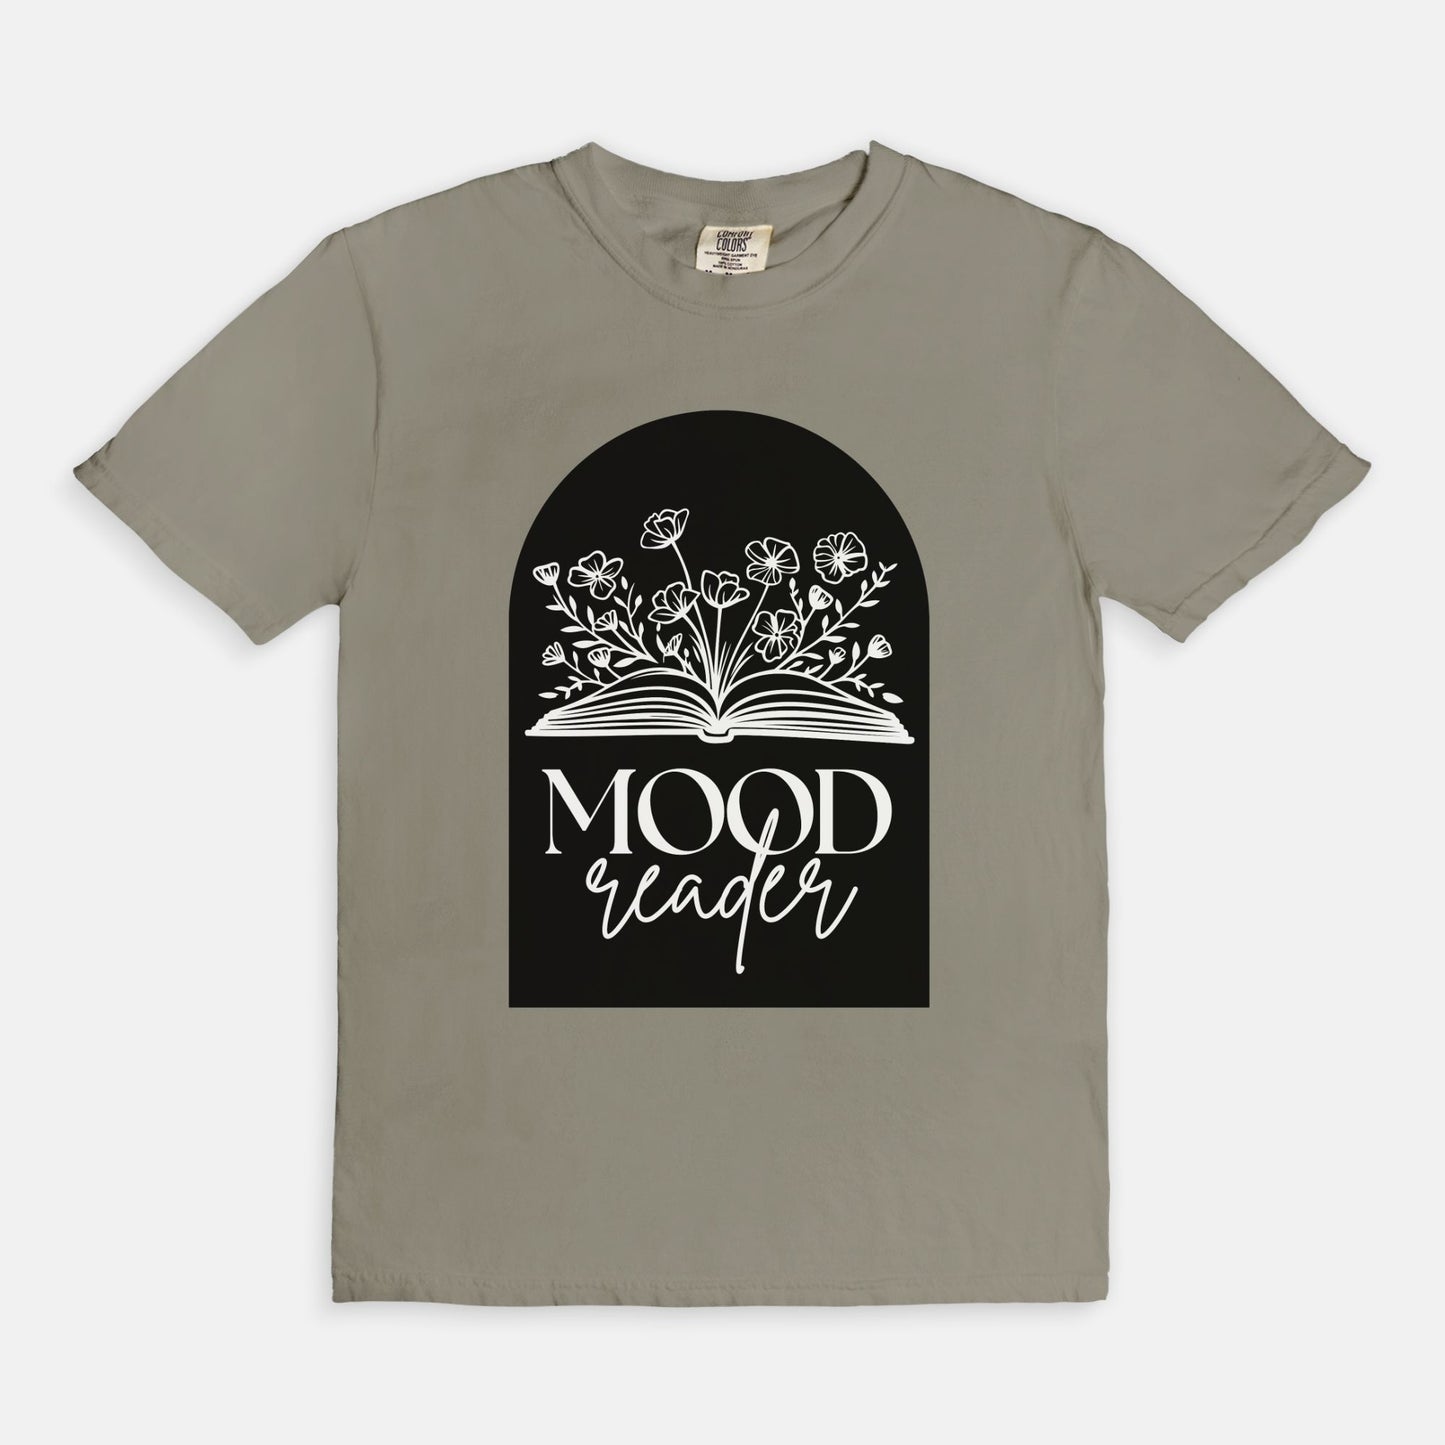 Mood Reader Tee Black and White